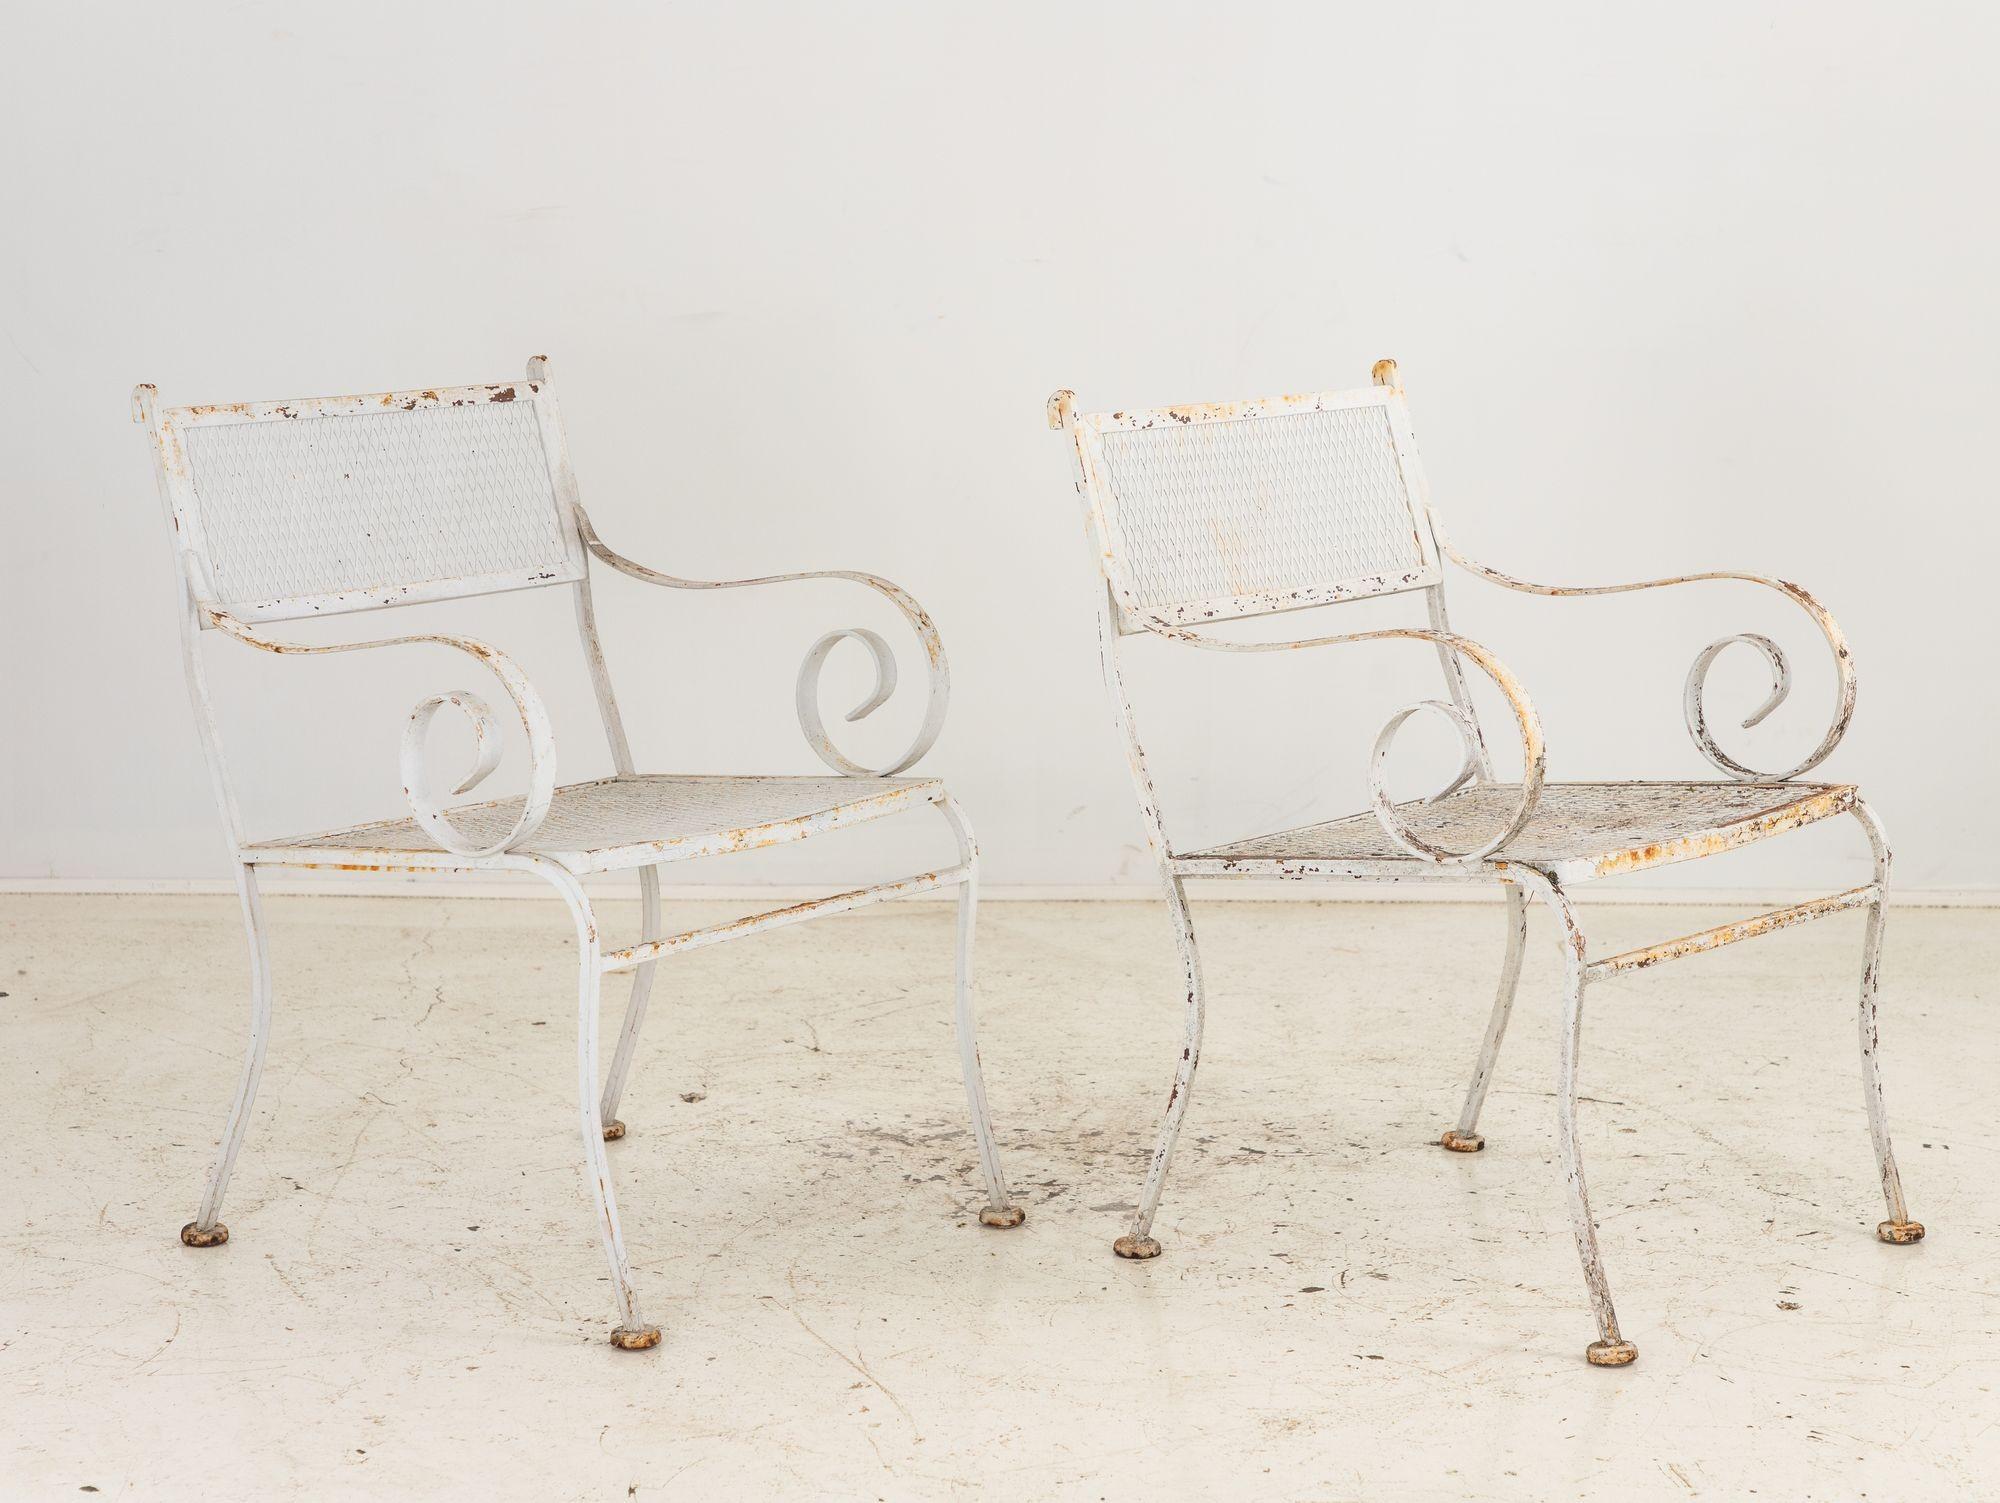 Pair White Painted Metal Garden Chairs, American mid 20th Century For Sale 2